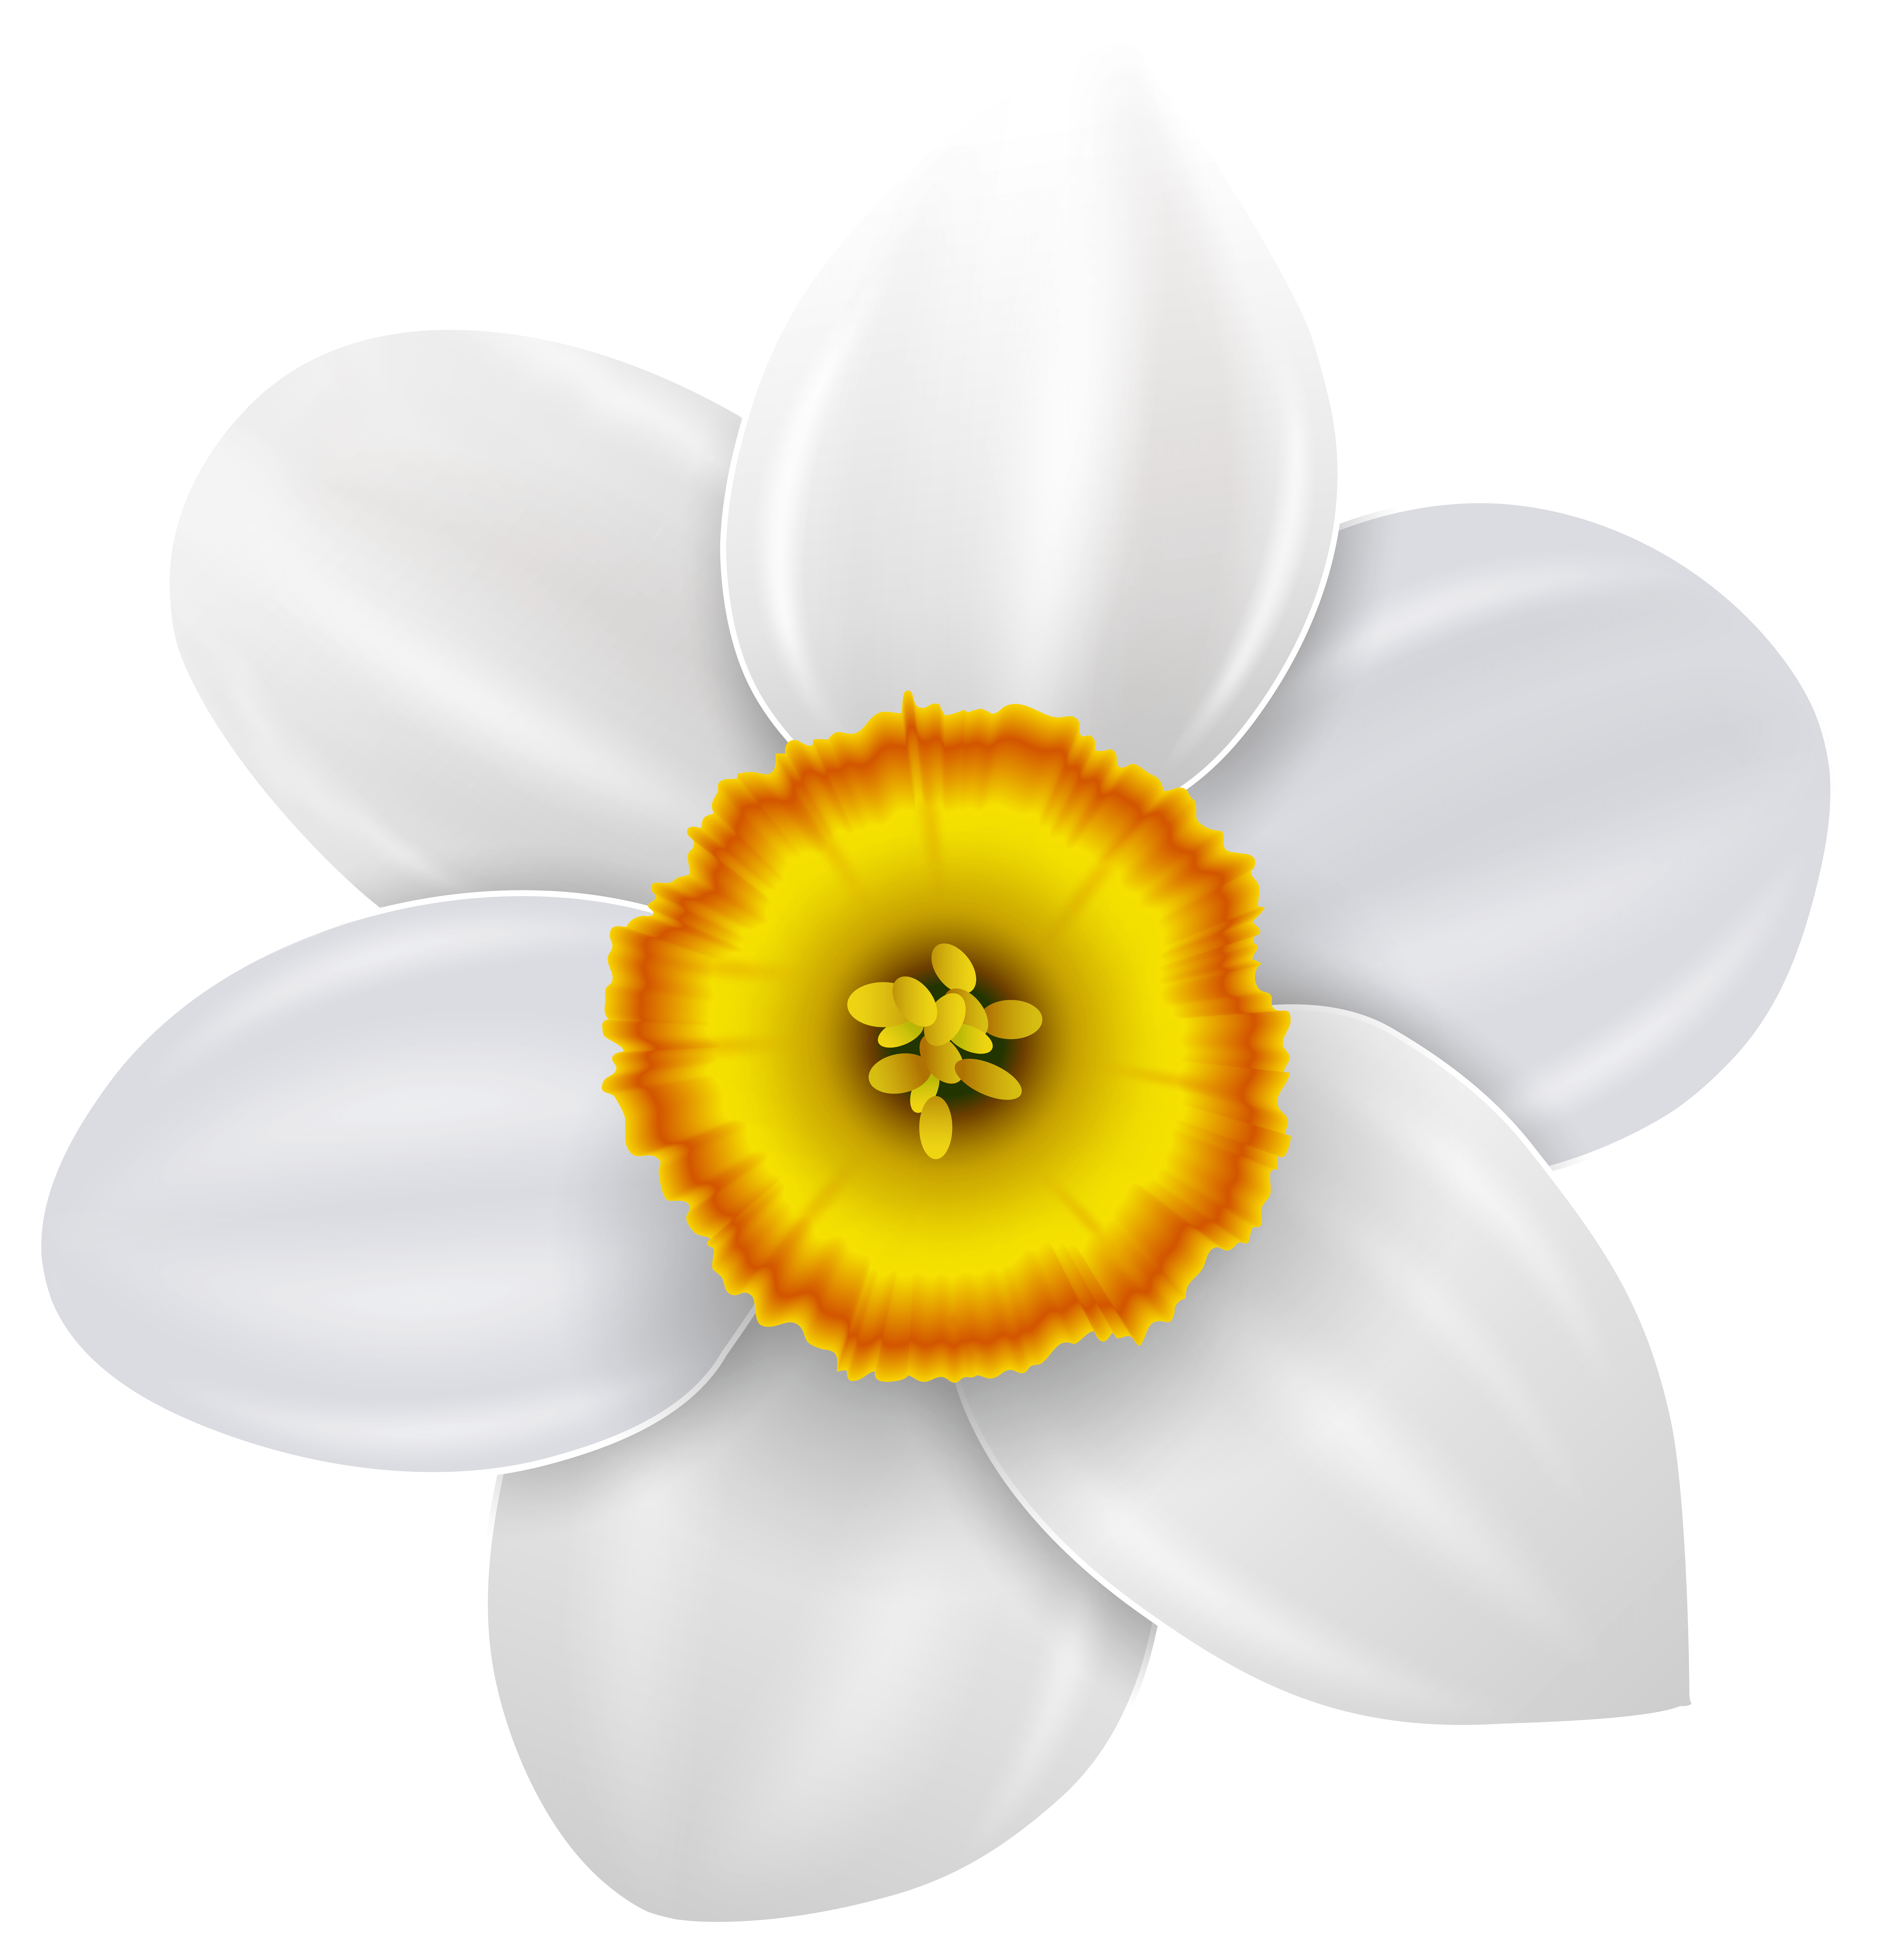 Narcissus Flower Logo - Narcissus Transparent PNG Clip Art Image | Gallery Yopriceville ...